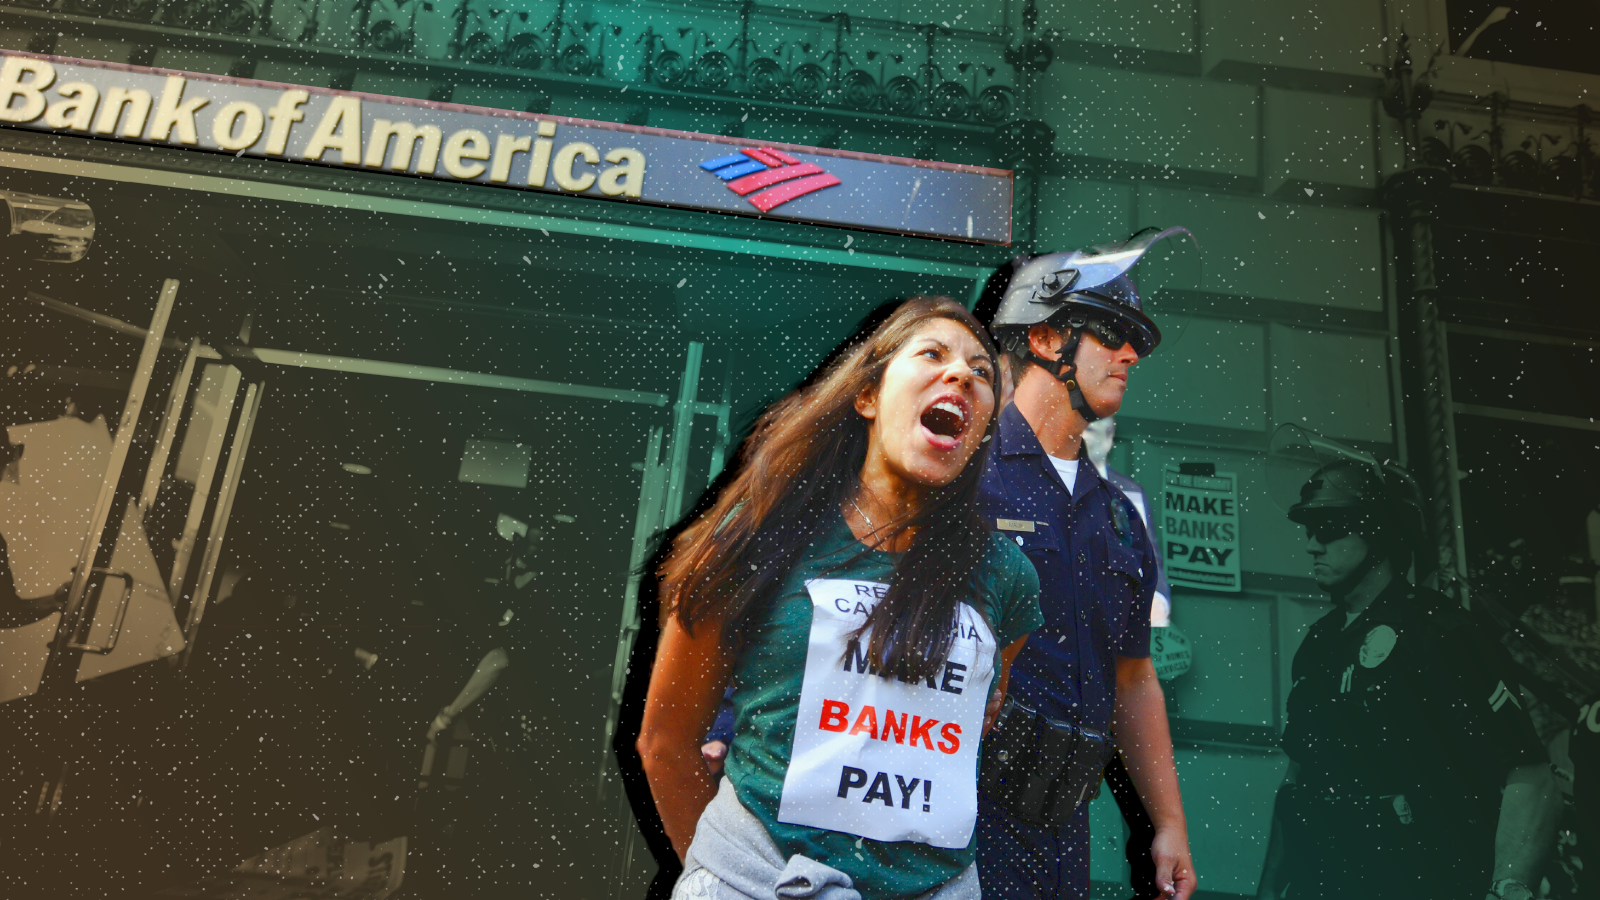 A protestor is taken into custody by police after refusing to leave a Bank of America branch in Los Angeles in 2011.